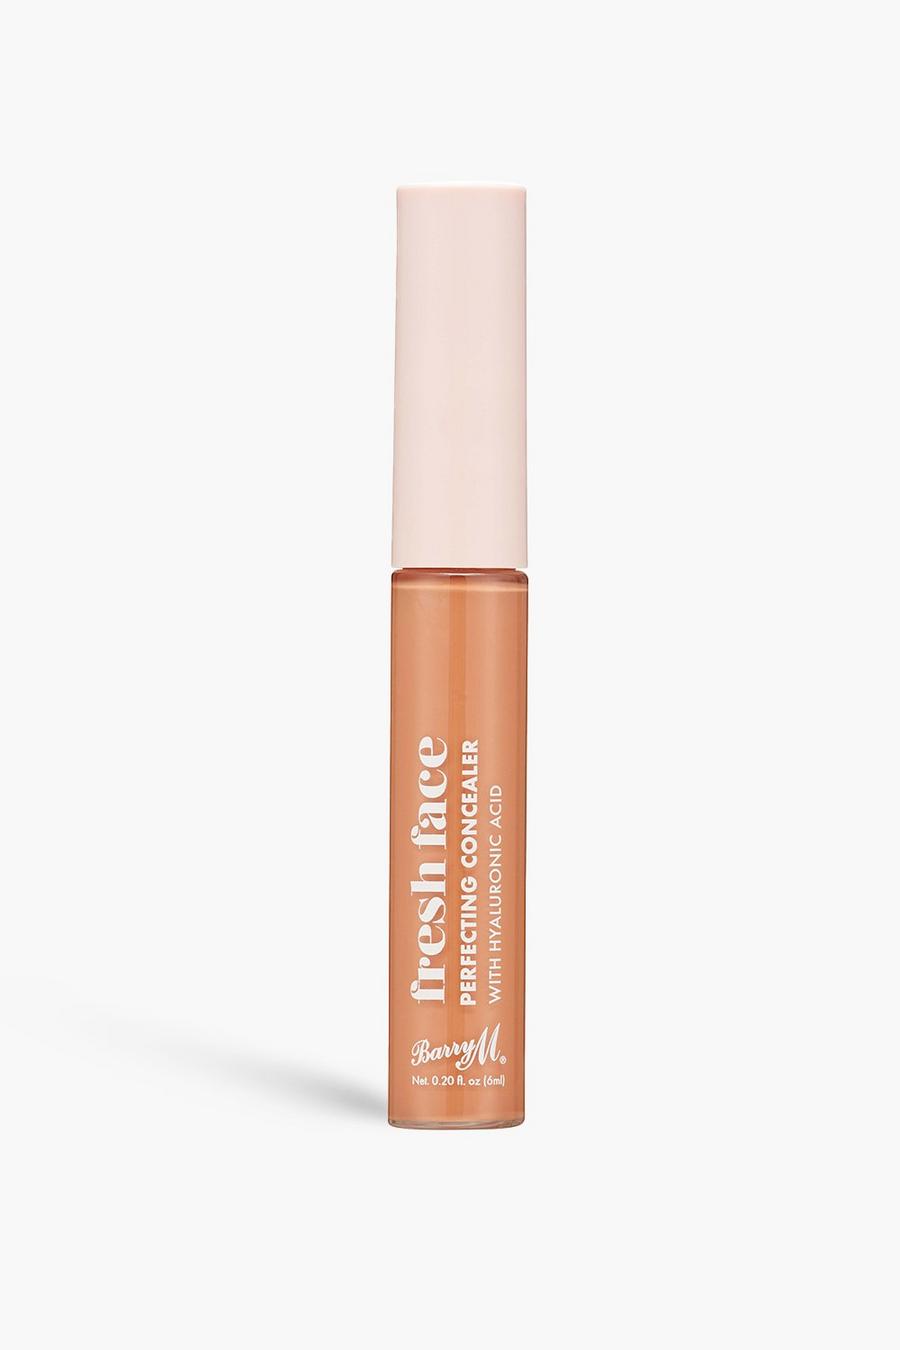 Tan marrone Fresh Face Perfecting Concealer – קונסילר 8 של Barry M